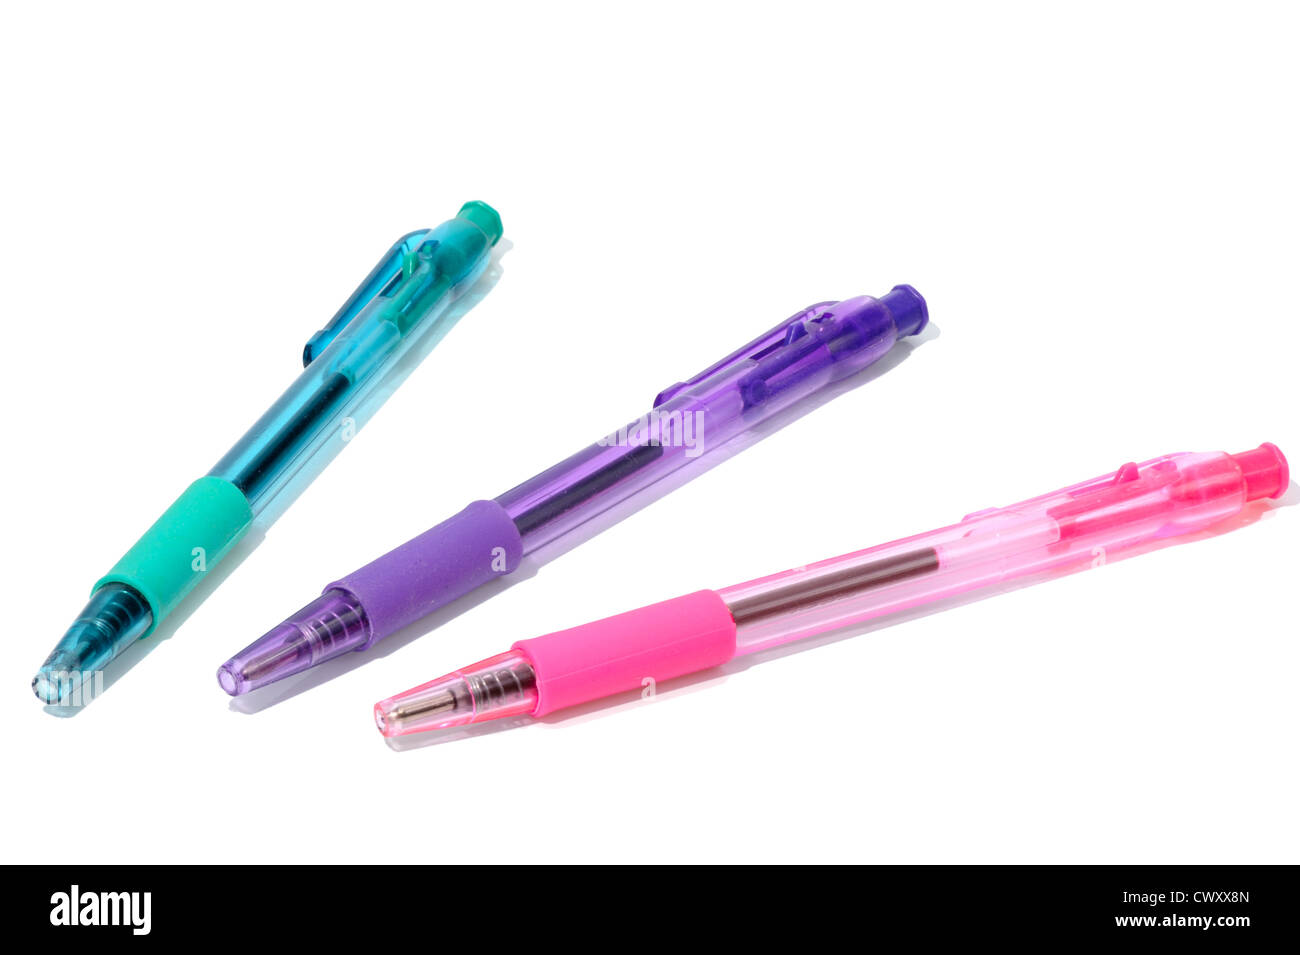 A set of transparent colored pens on a white background, isolated. Stock Photo